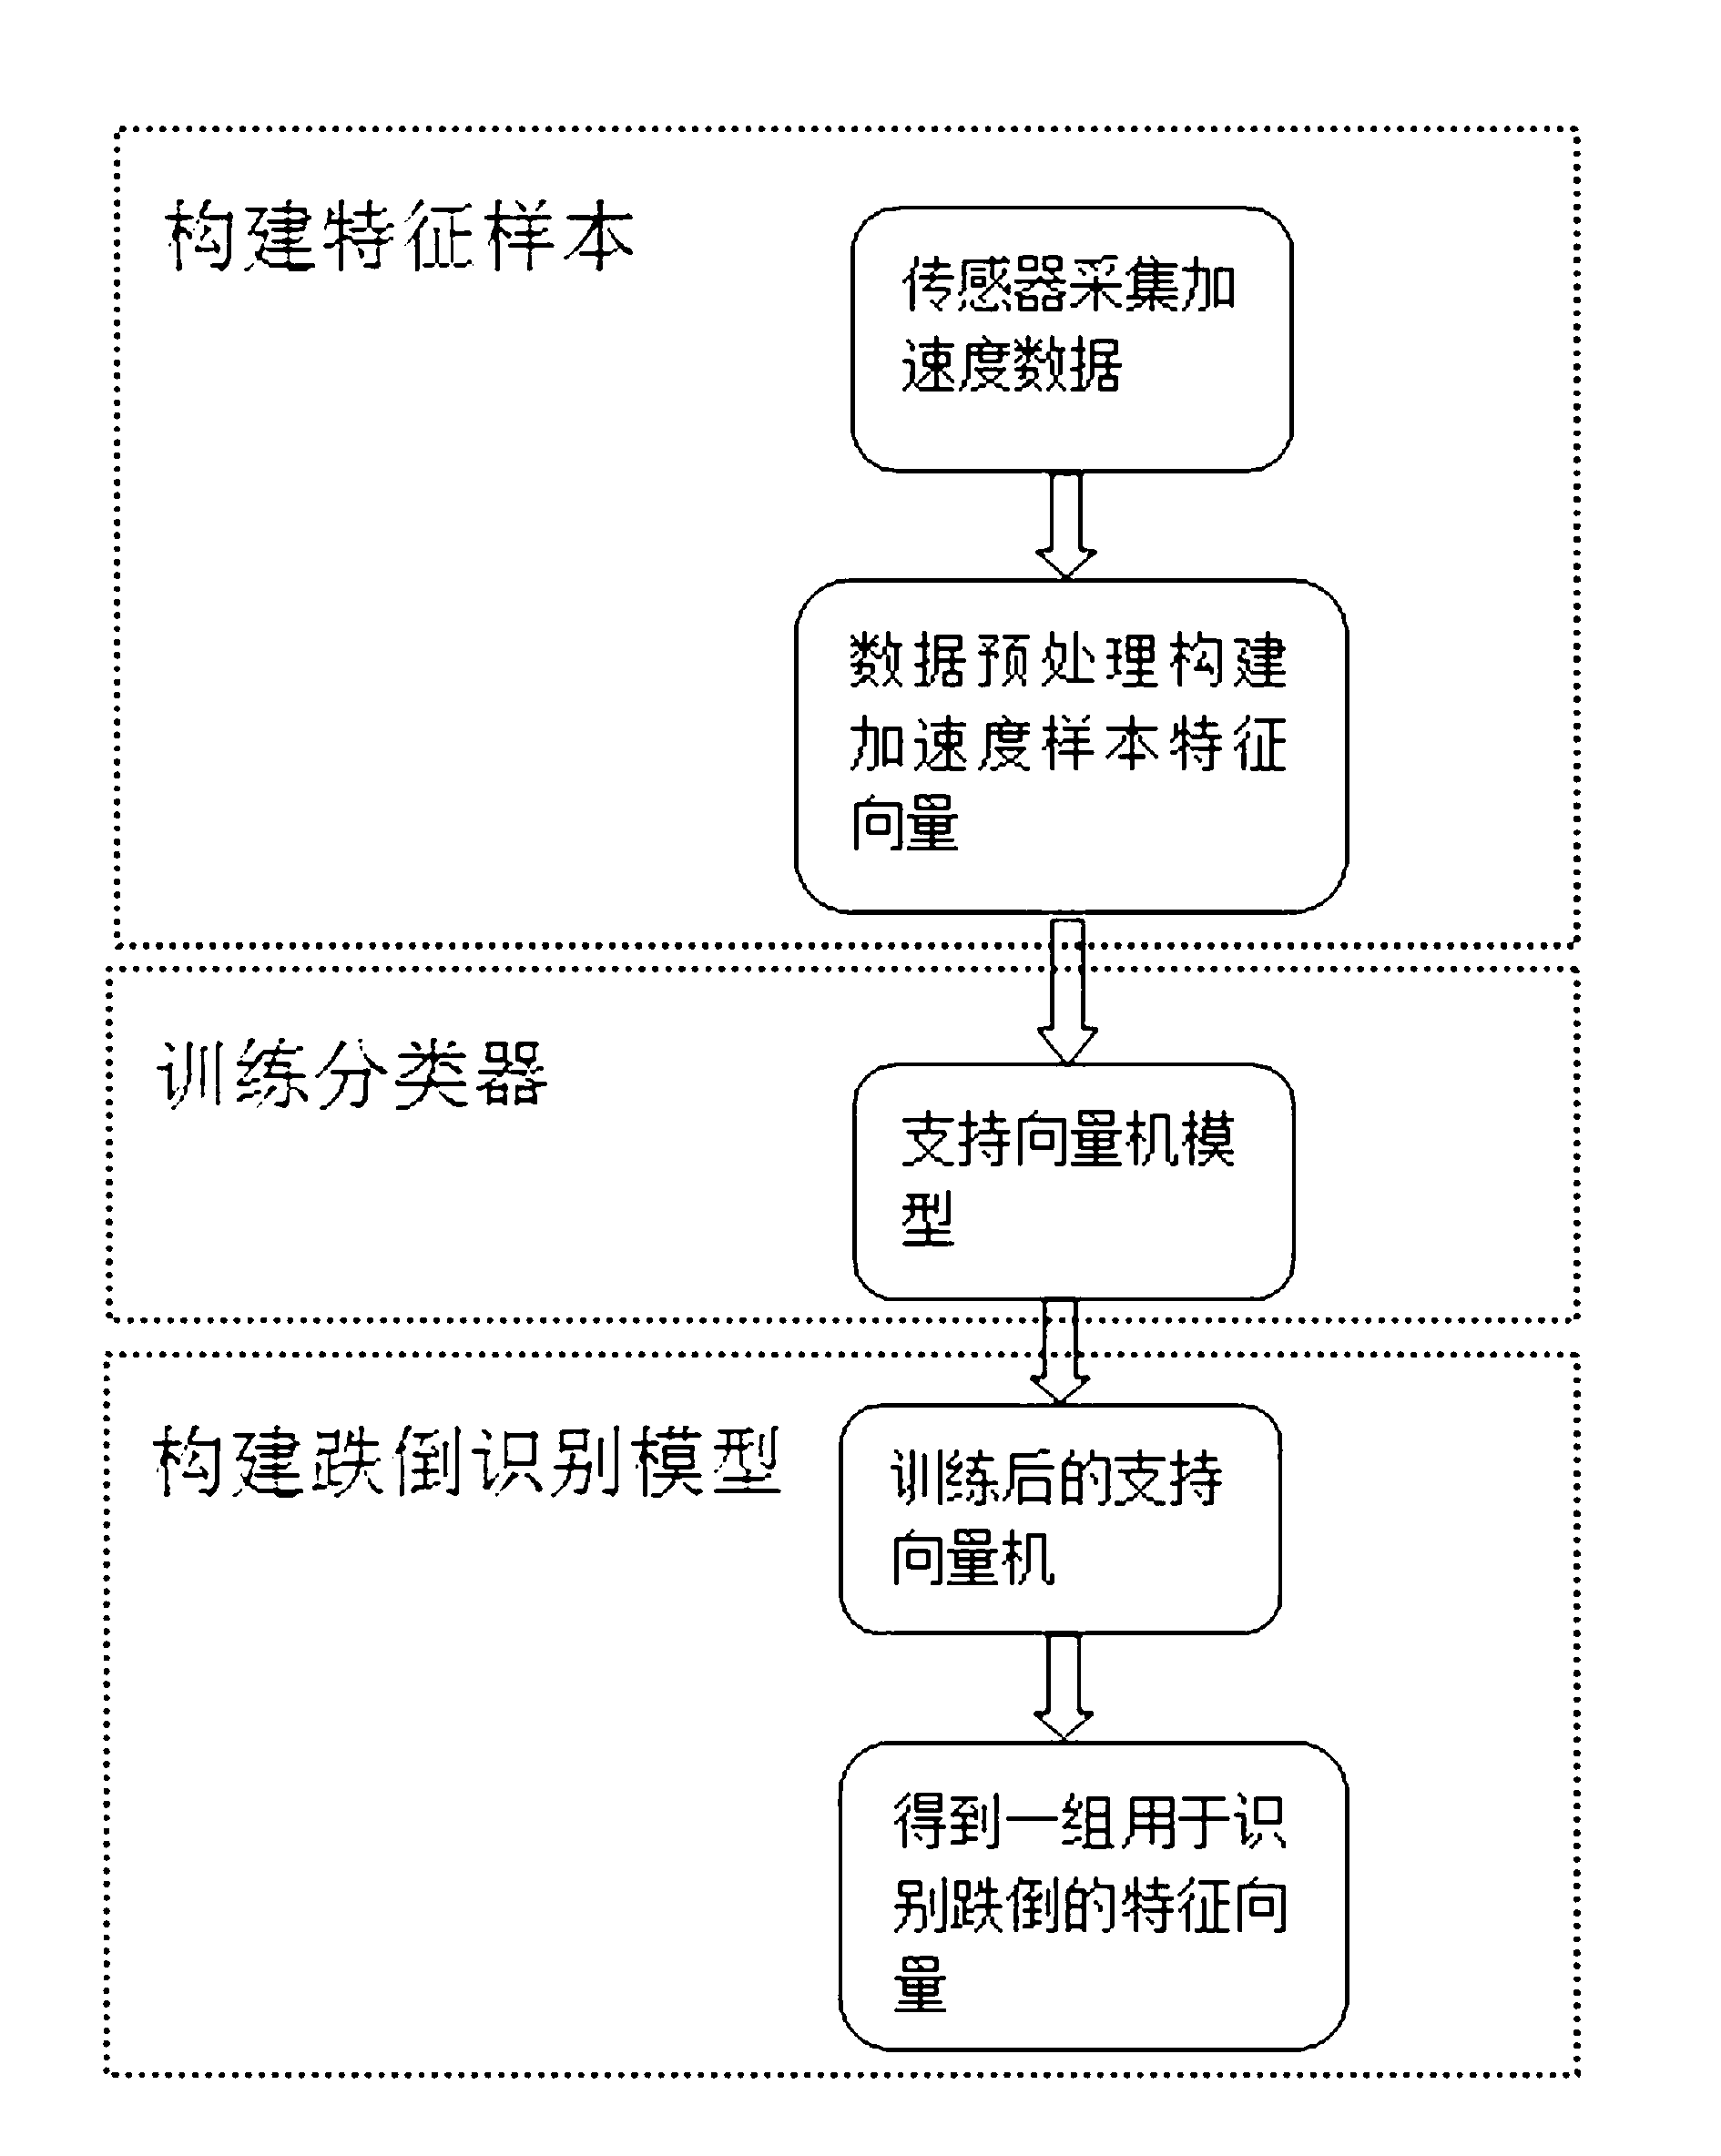 Method and device for monitoring tumble